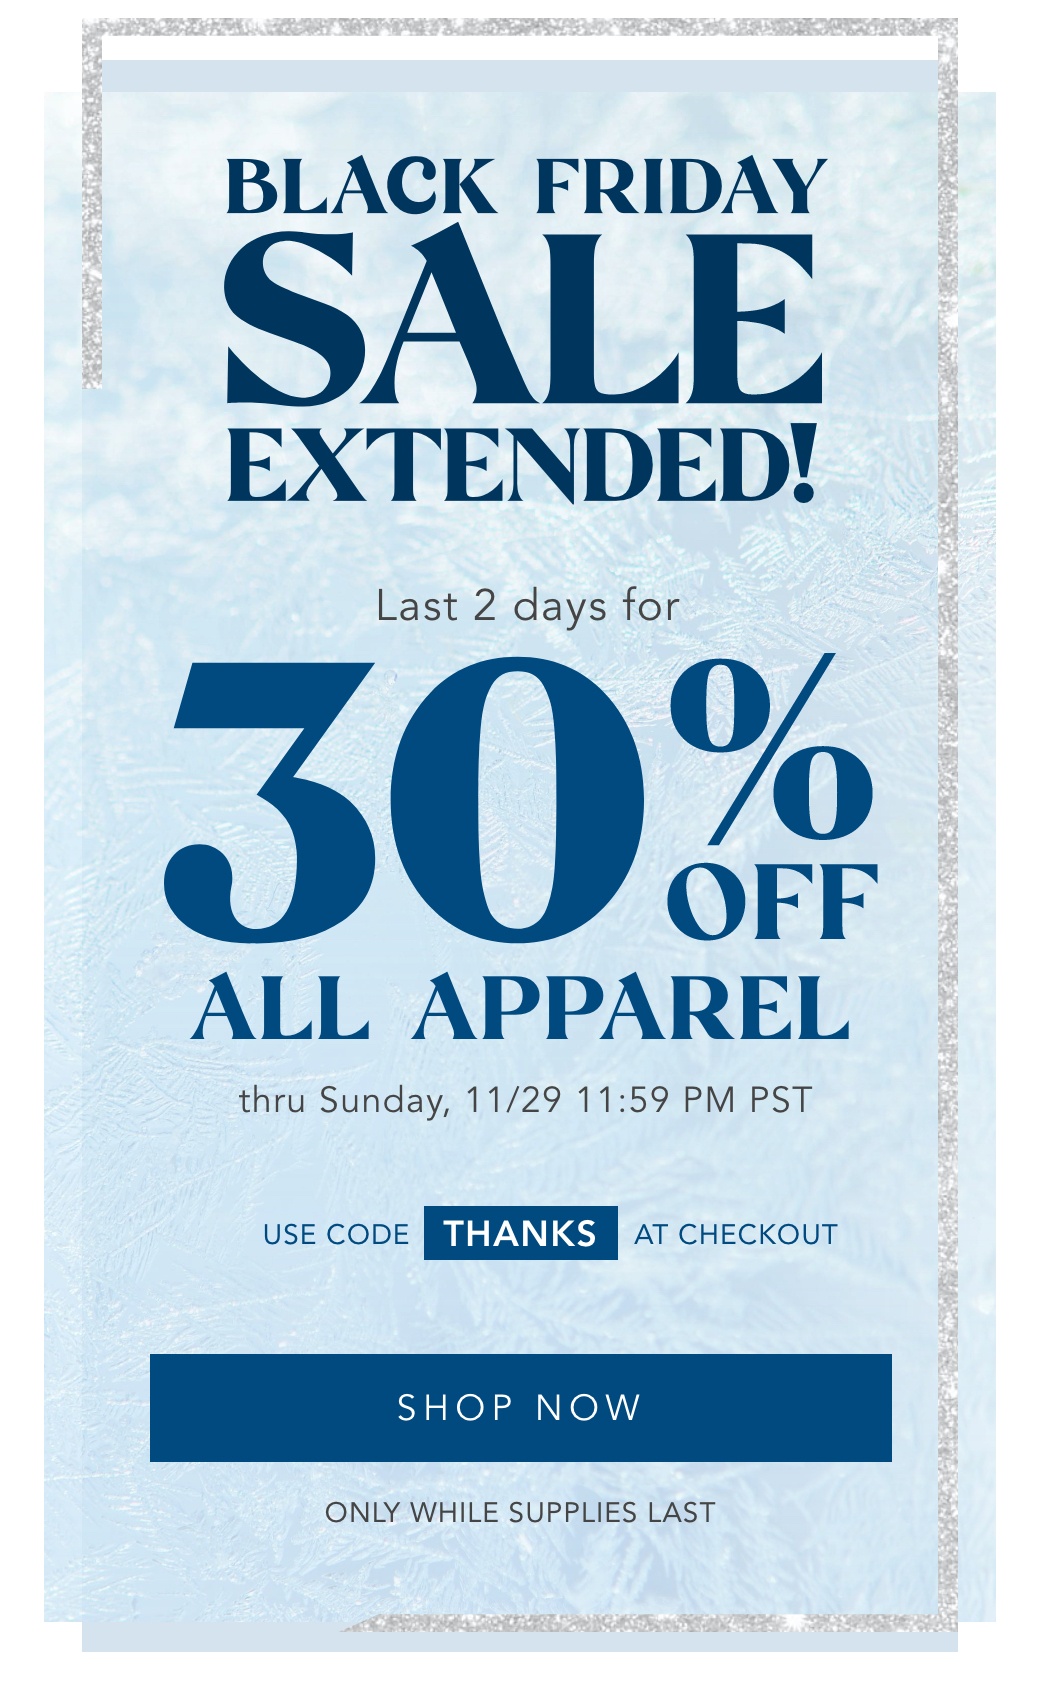 Black Friday Sale EXTENDED! Last 2 days for 30% off ALL apparel thru Sunday, 11/29 11:59 PM PST